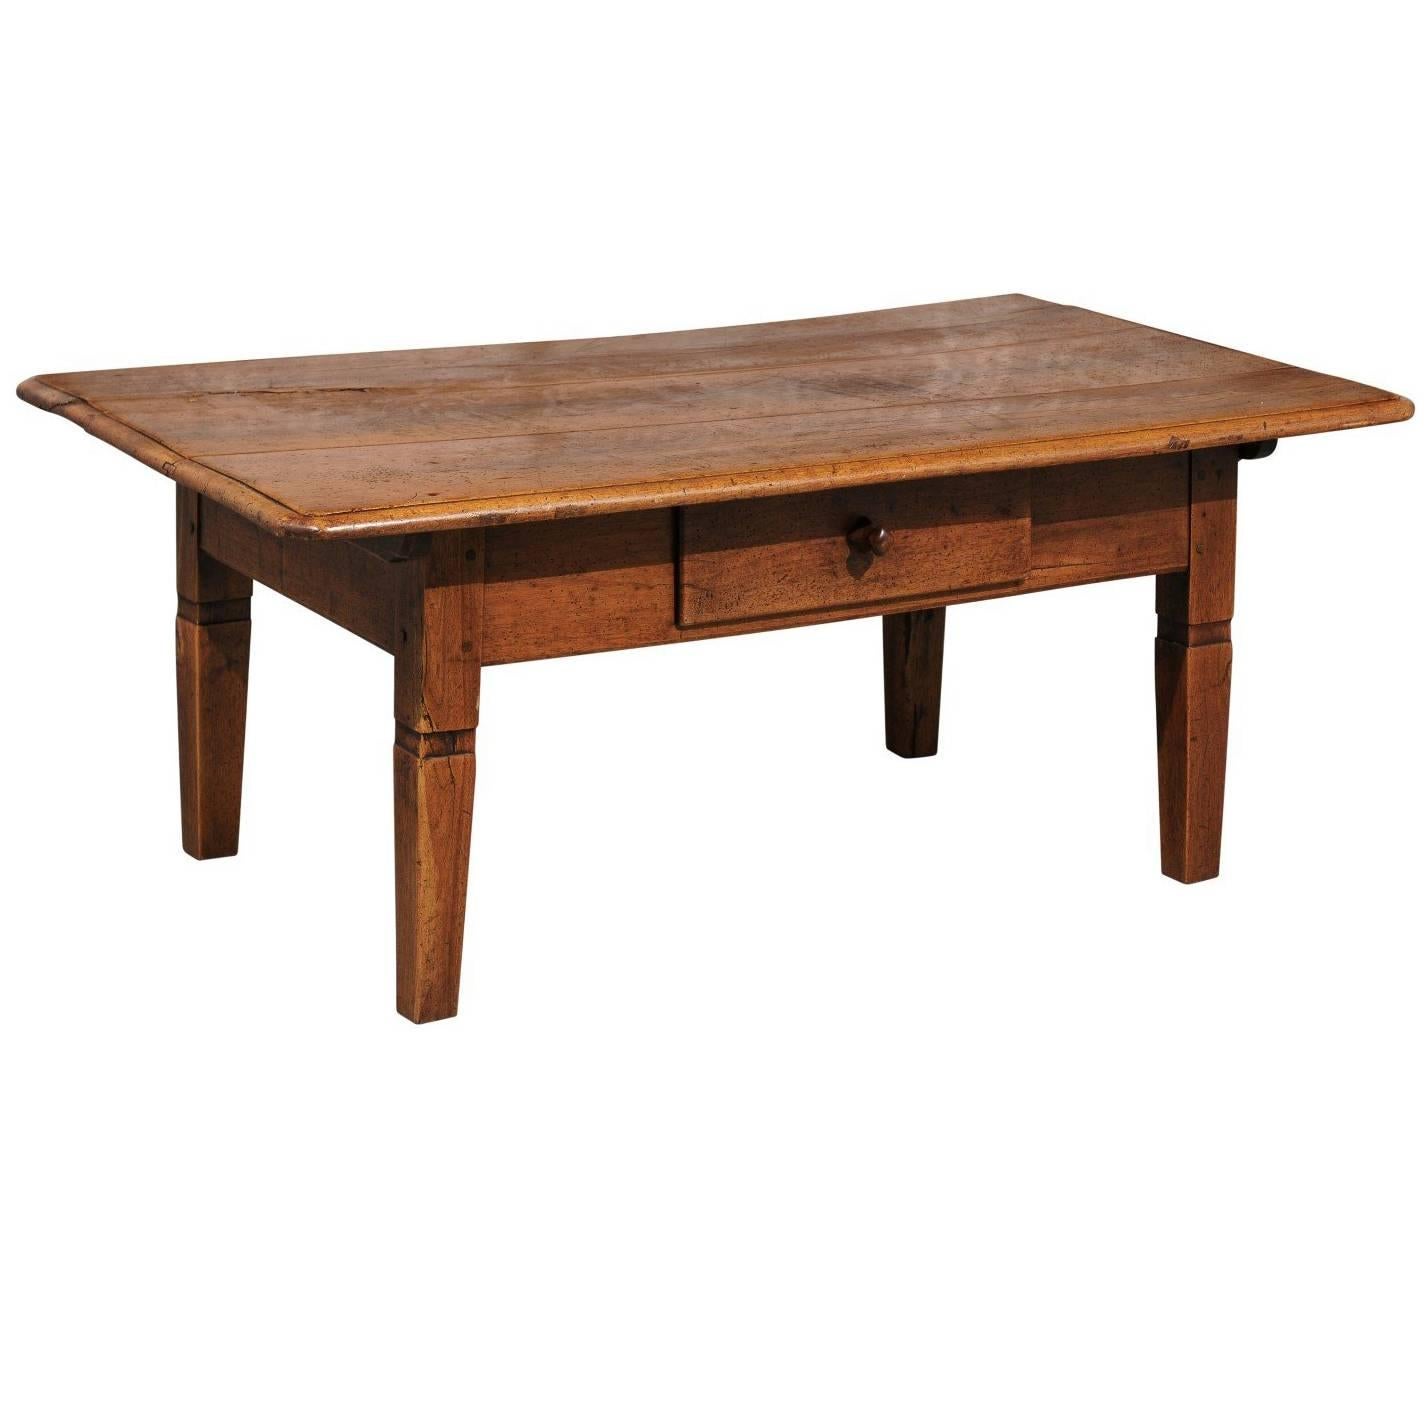 French Walnut Coffee Table with Single Drawer and Tapered Legs from the 1870s